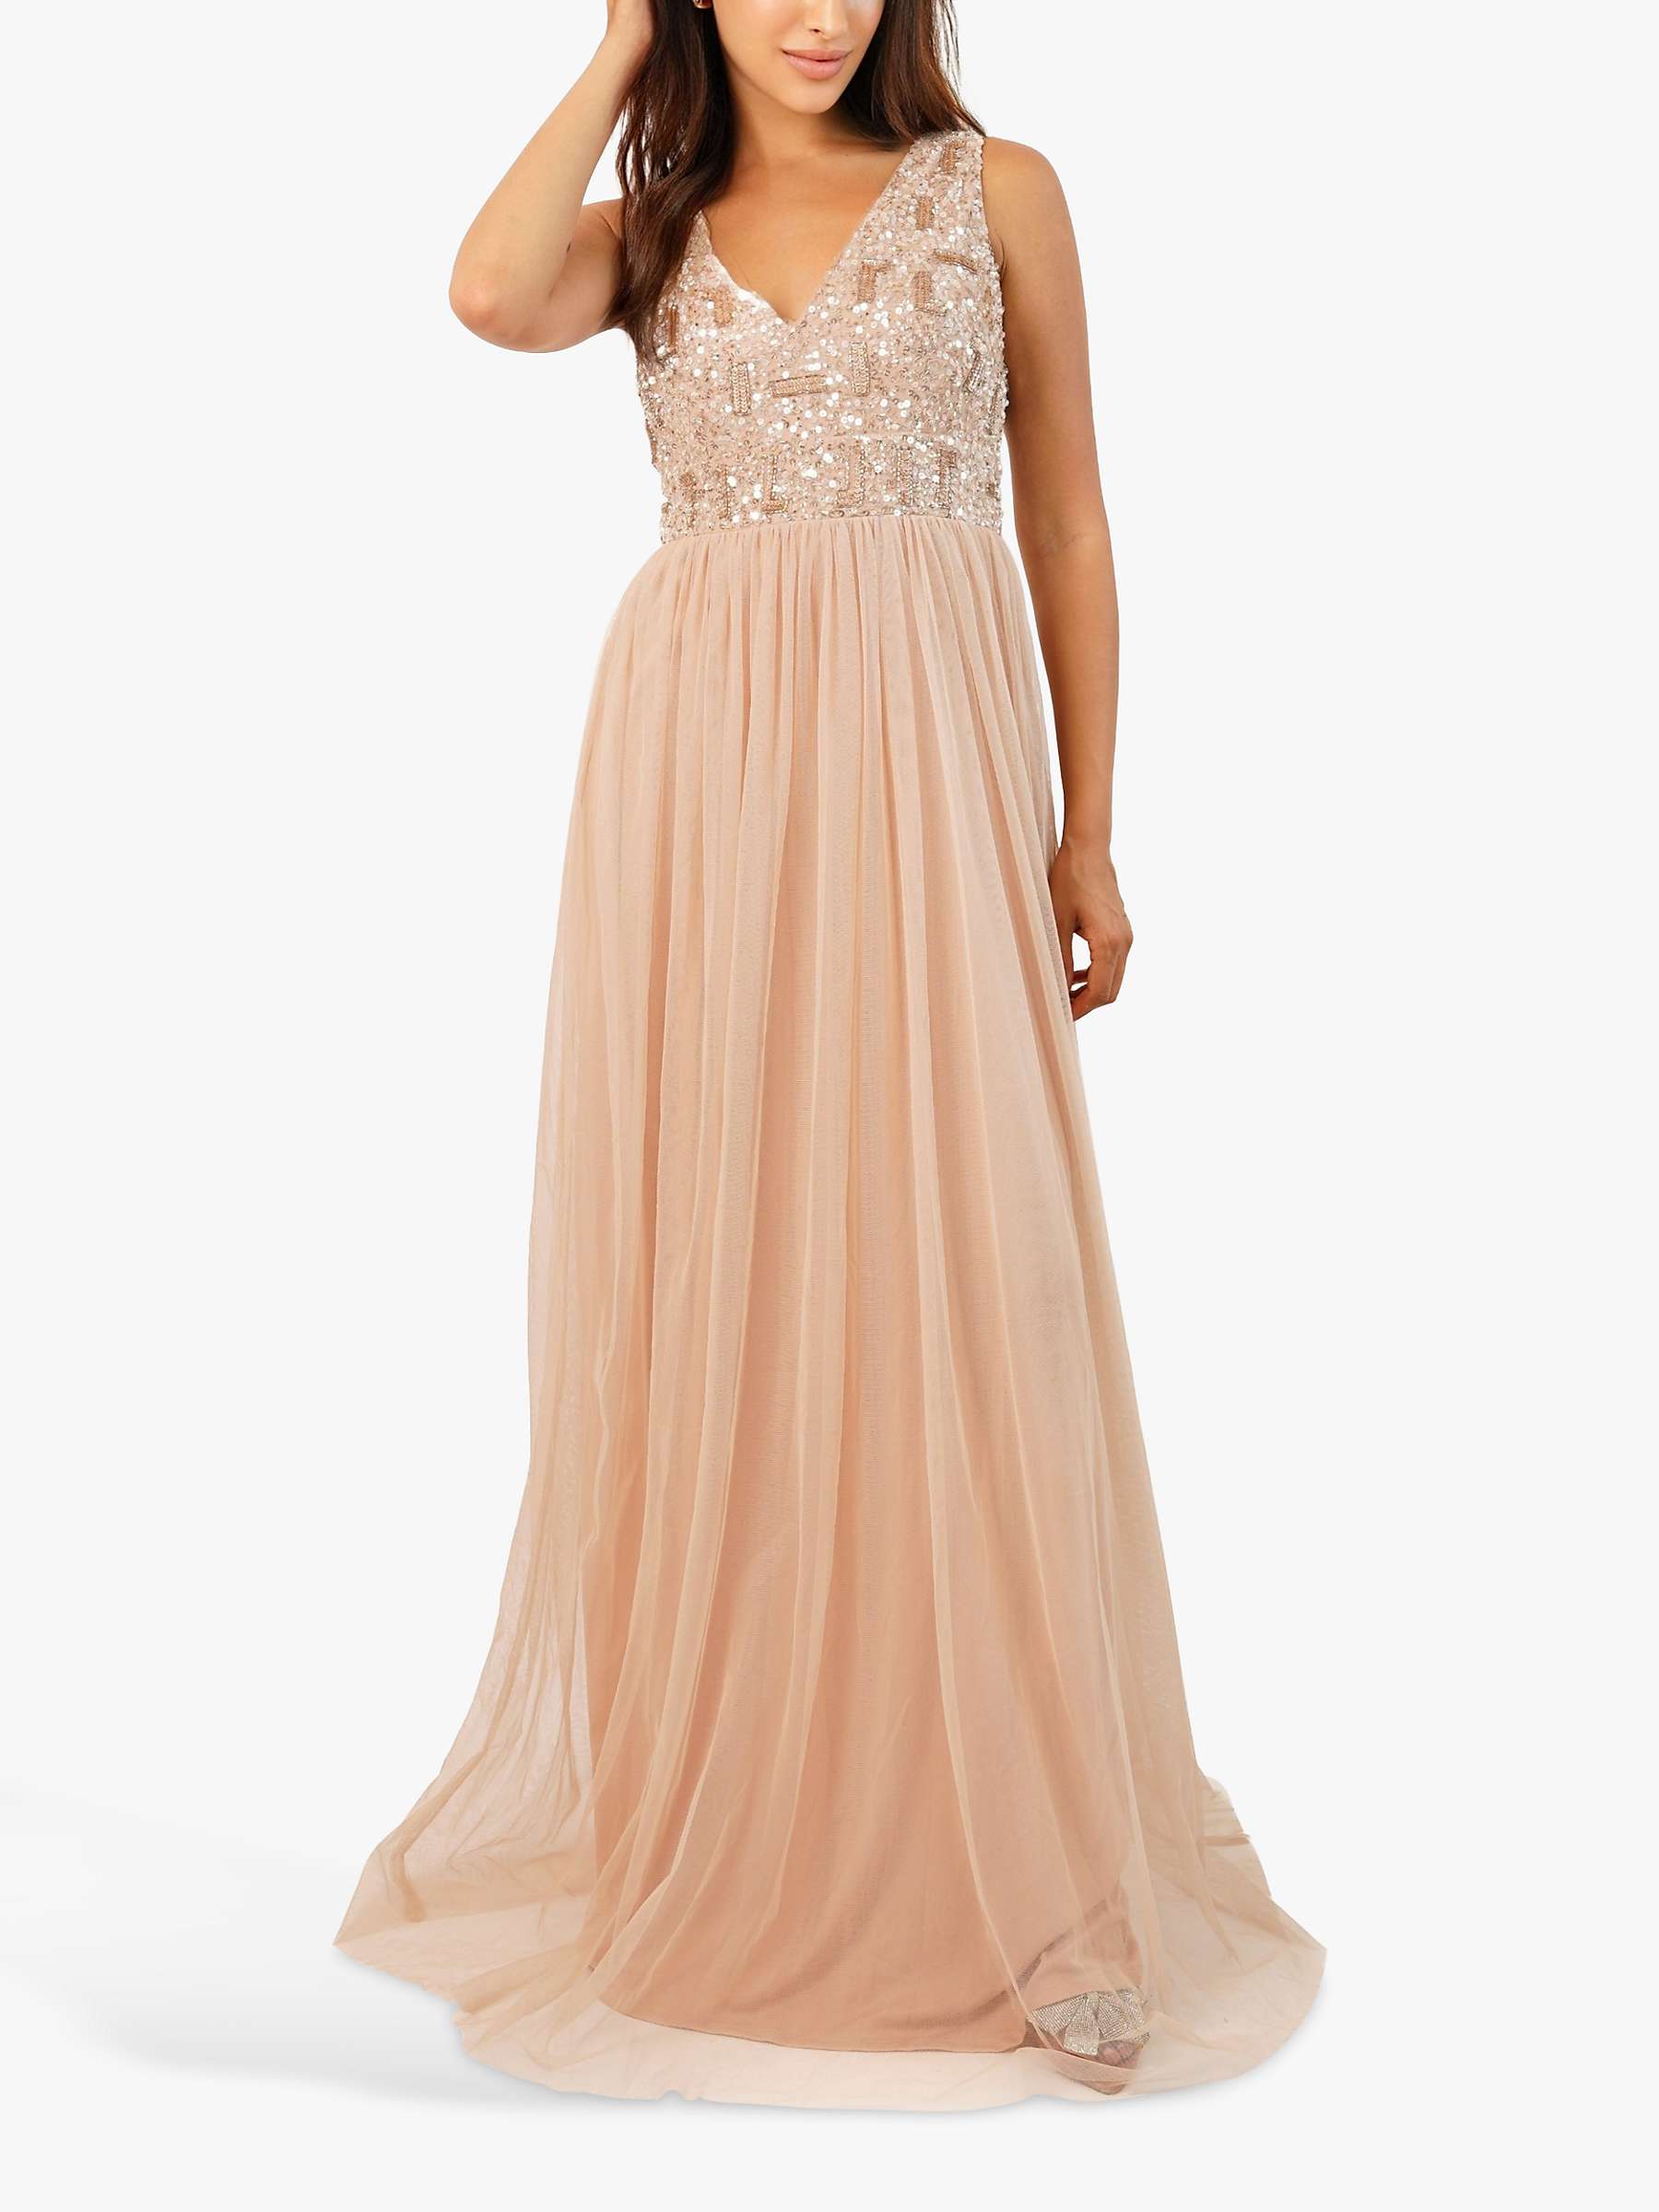 Buy Lace & Beads Aurora Embellished Layered Mesh Maxi Dress, Nude Online at johnlewis.com